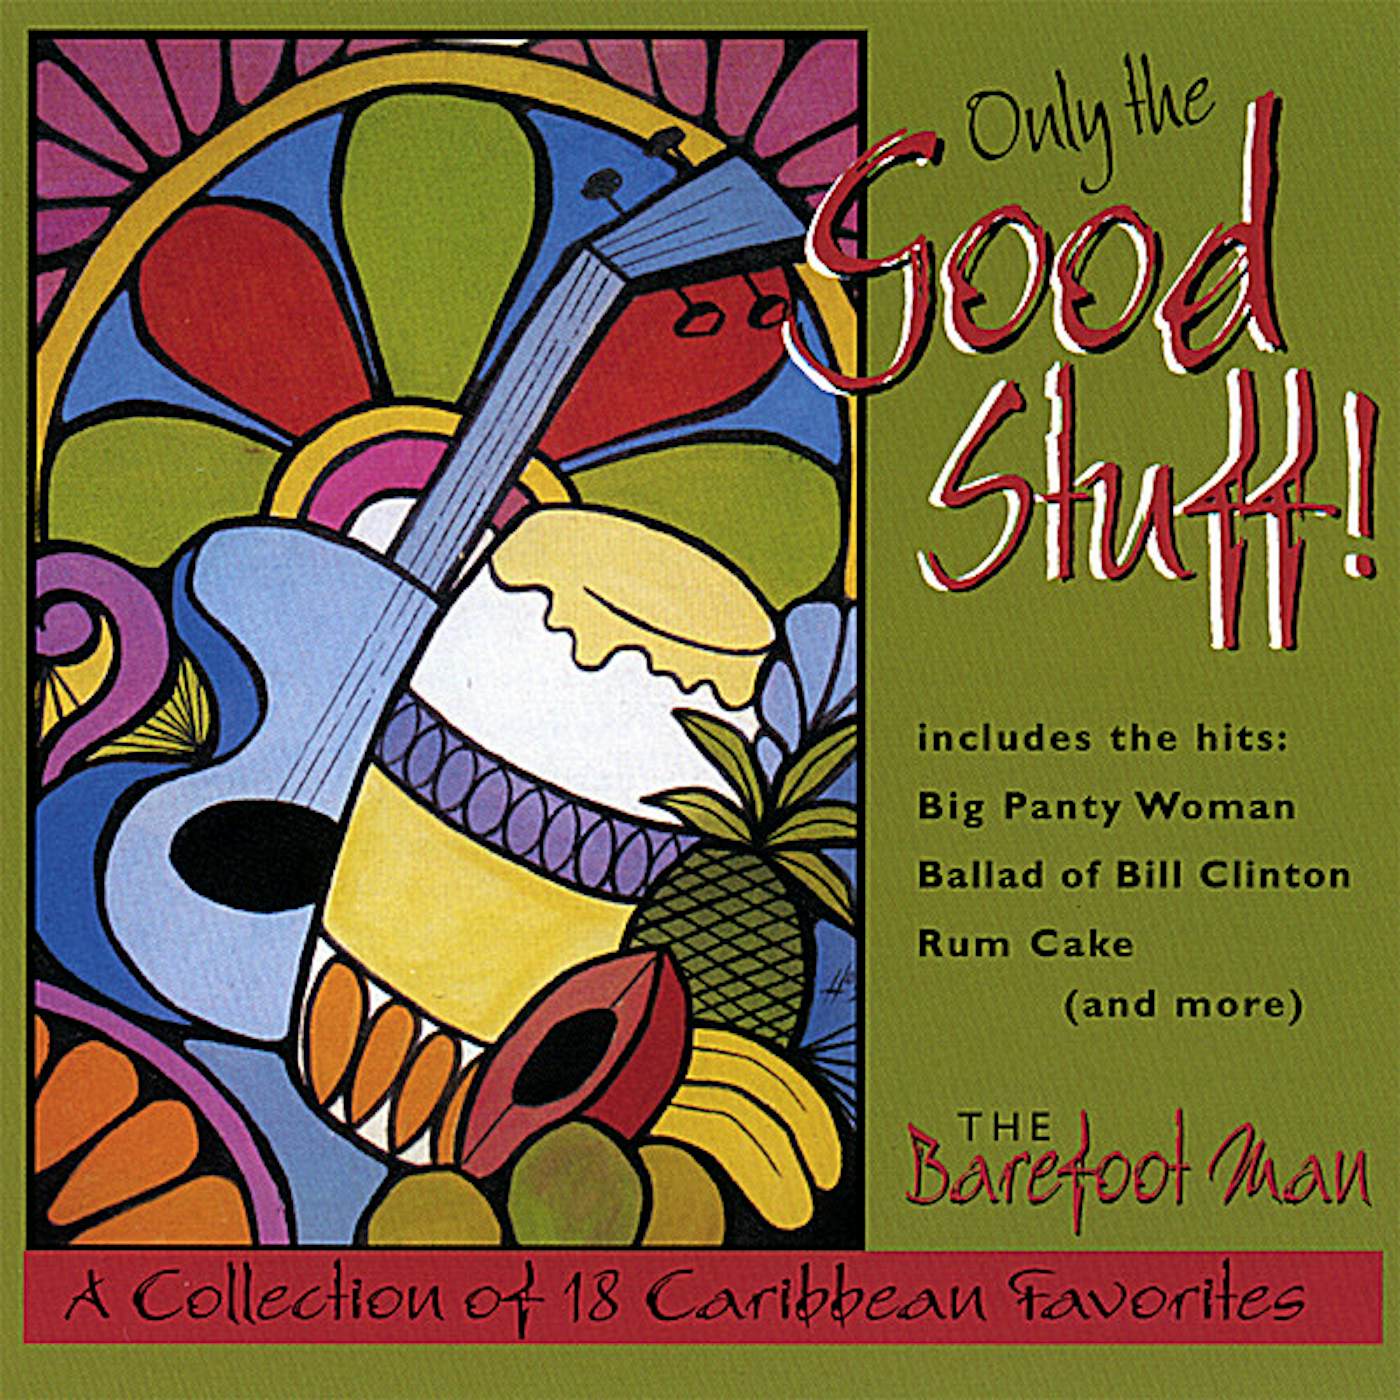 Barefoot Man ONLY THE GOOD STUFF CD